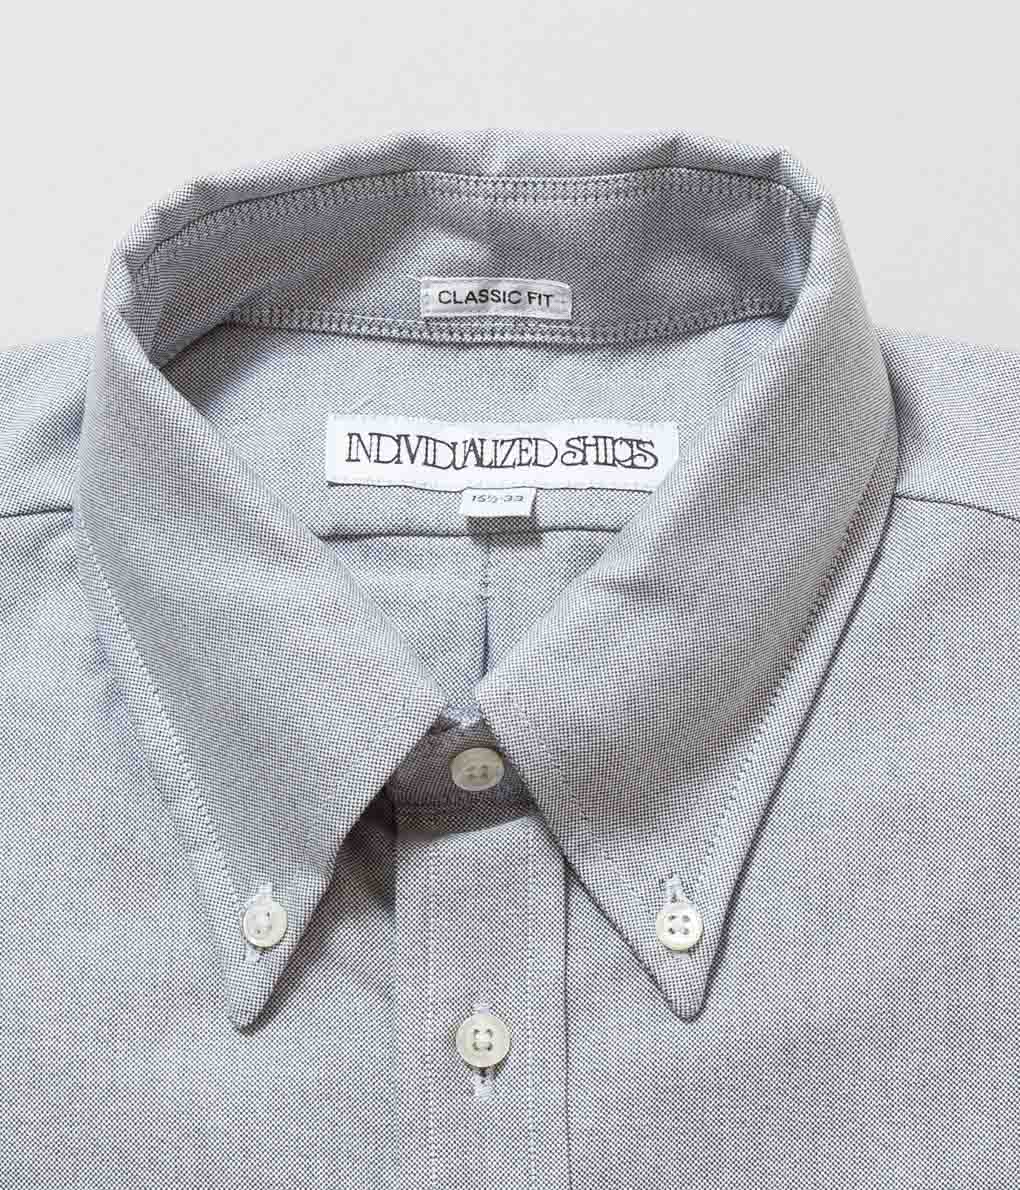 INDIVIDUALIZED SHIRTS "CAMBRIDGE OXFORD (CLASSIC FIT BUTTON DOWN SHIRT) (LIGHT GRAY)"